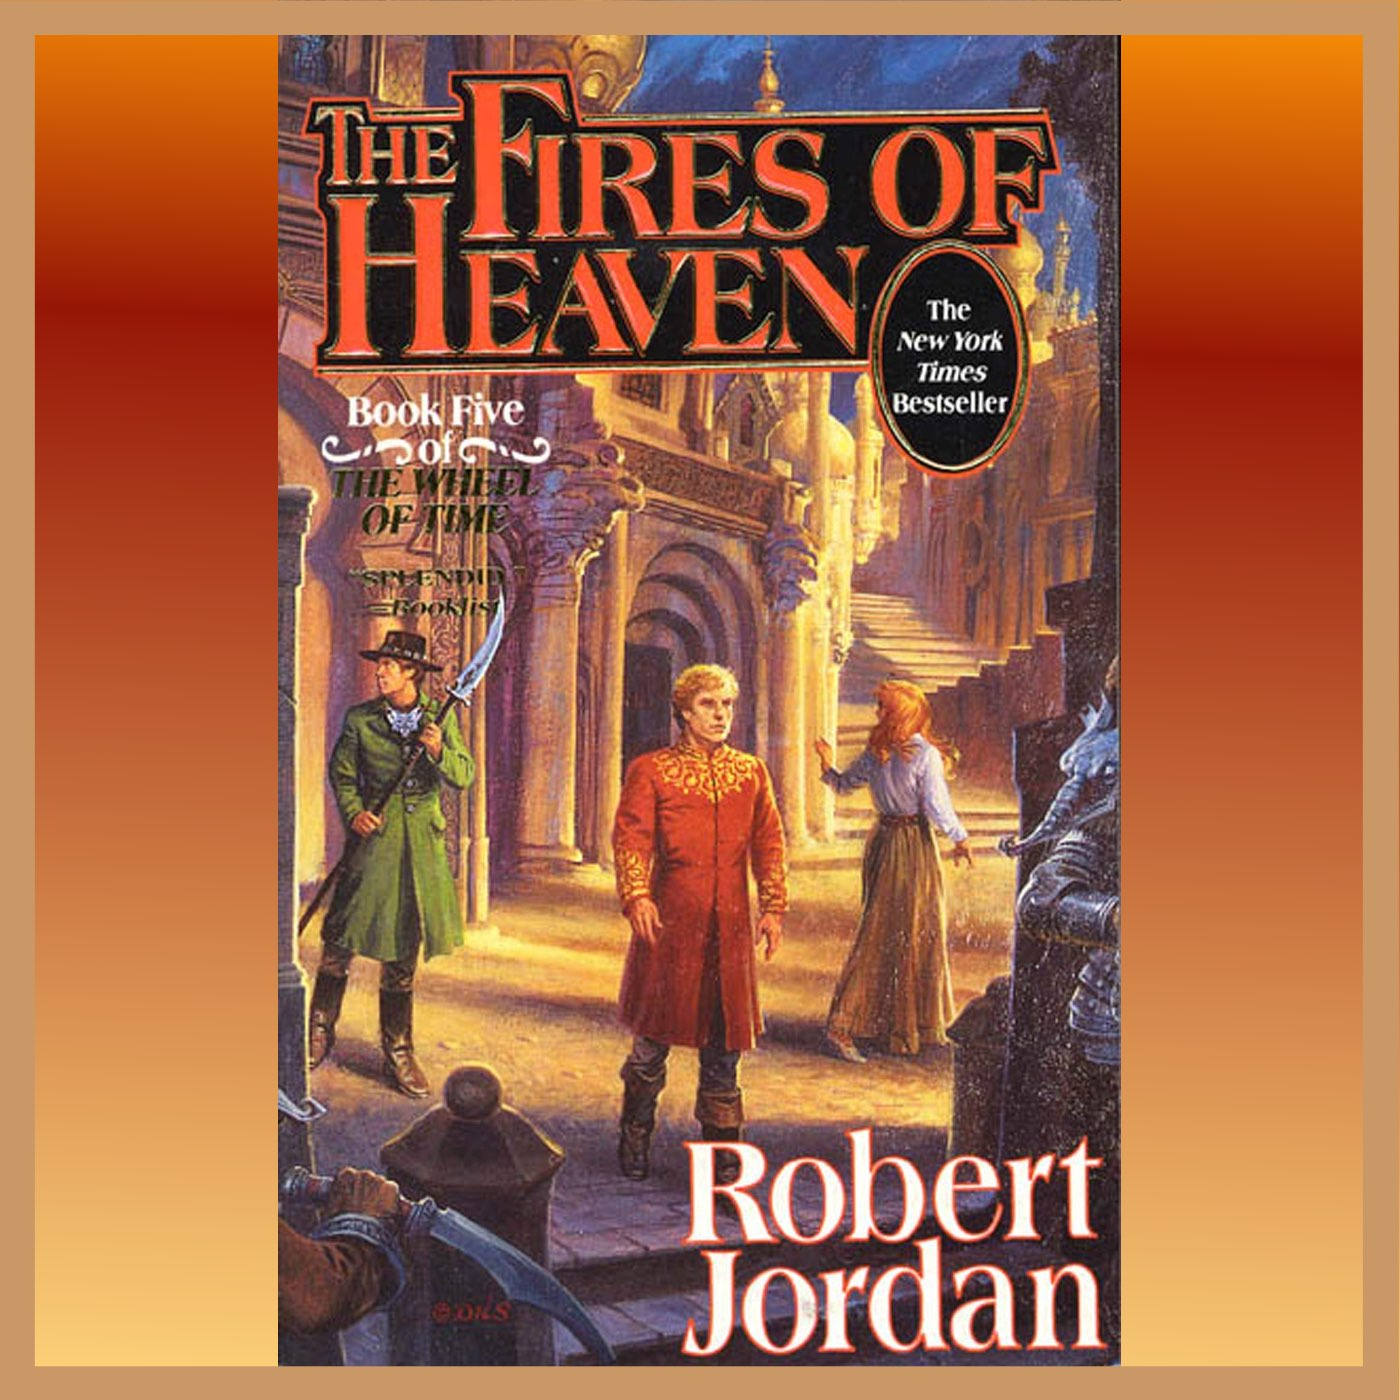 The Fires of Heaven | Part 5 | The Wheel of Time